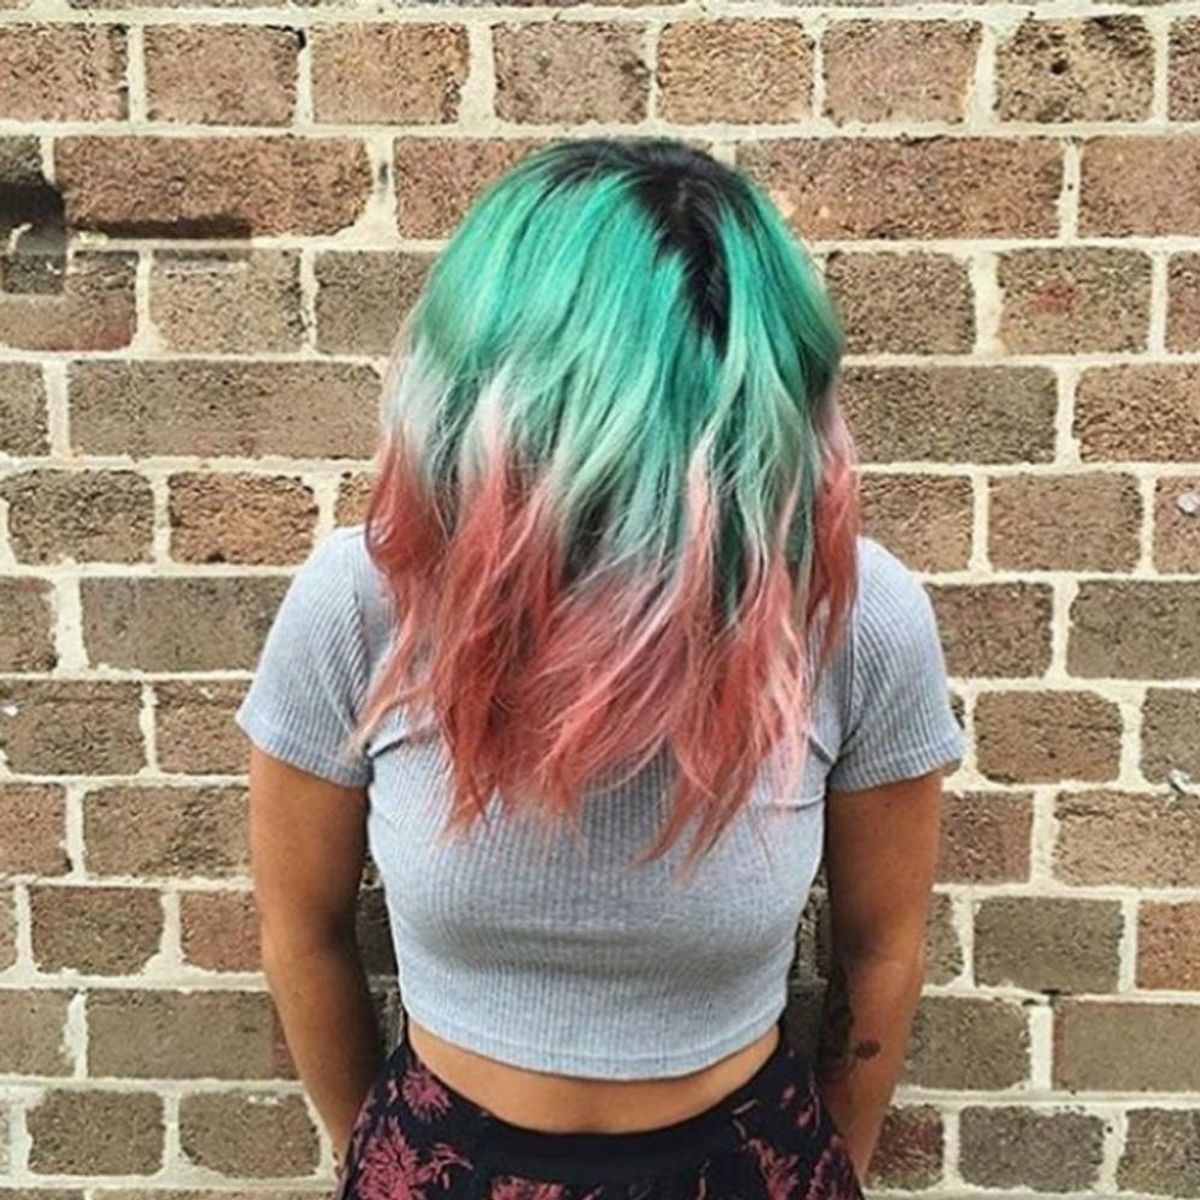 This Is the One Hair Trend That Might Trump Unicorn Hair